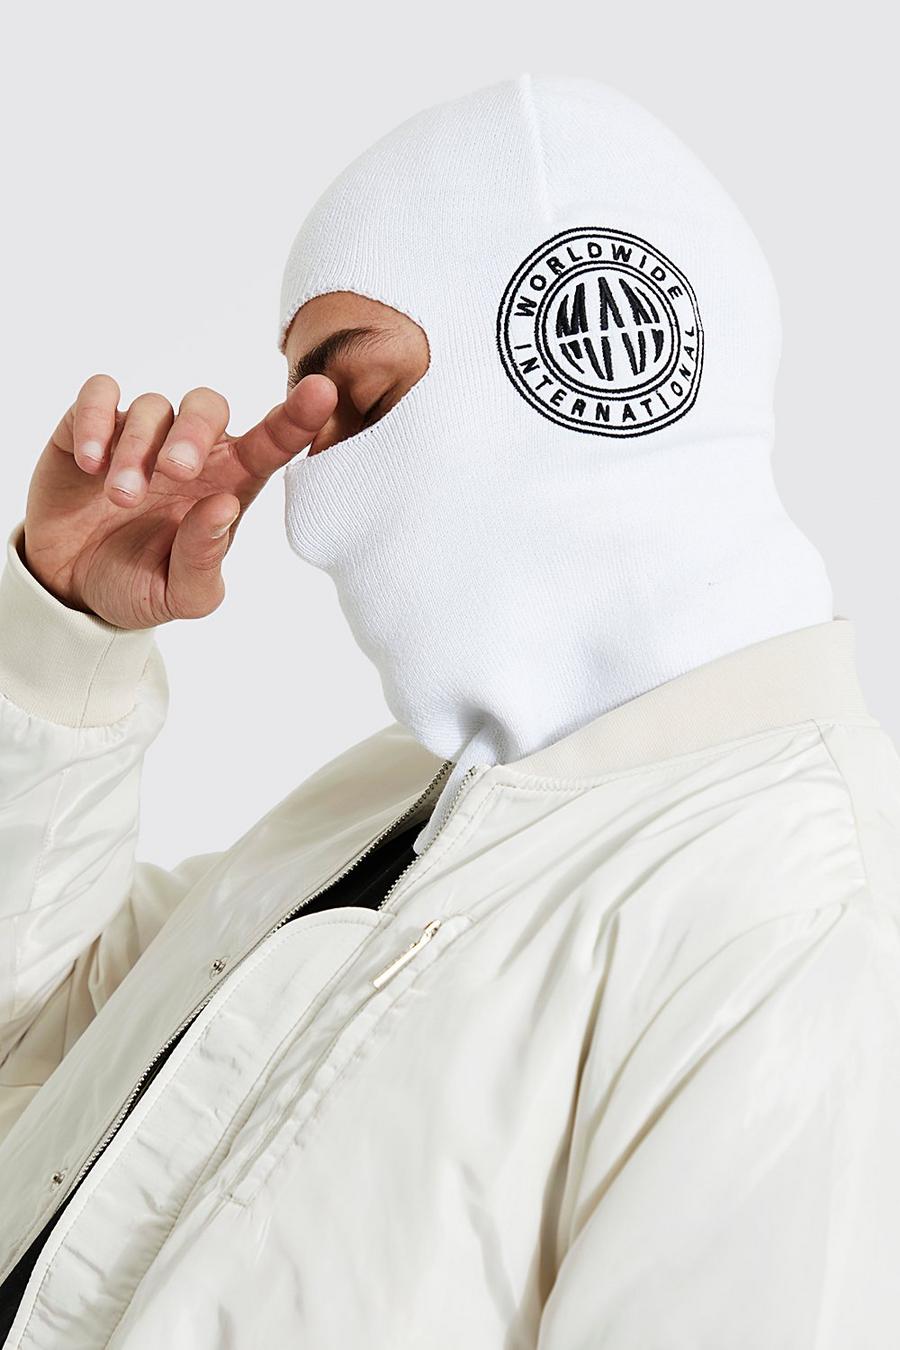 Cagoule à broderie Worldwide, White blanc